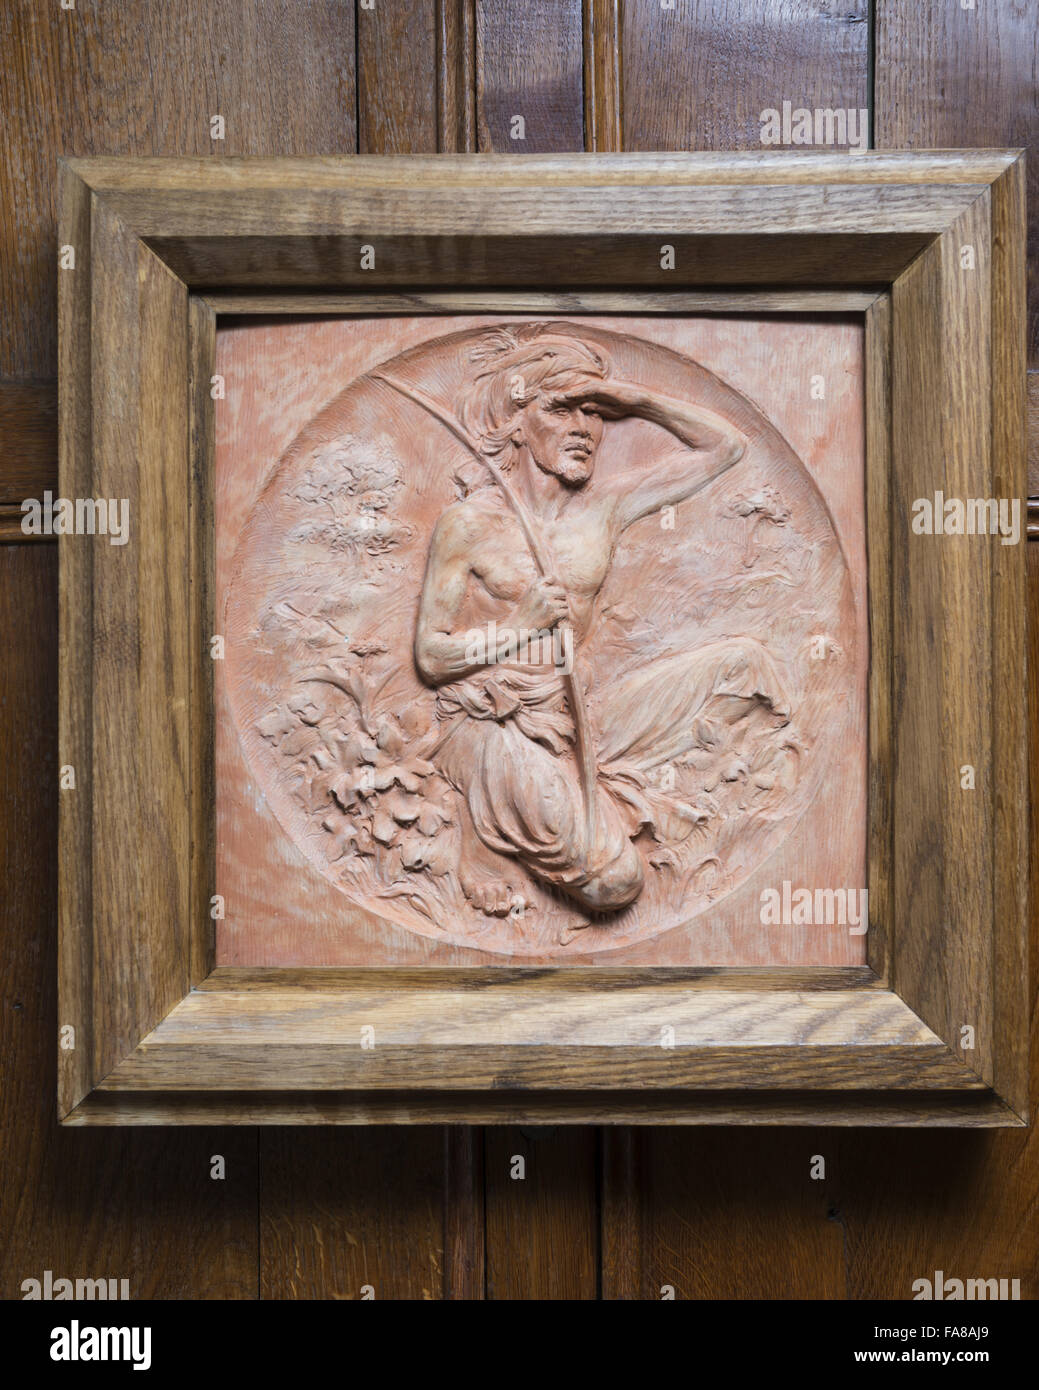 Plaque showing a kneeling man in the Exhibition Room at Bateman's, East Sussex. Oak, Terracotta. National Trust Inventory Number 761586. Bateman's was the home of the writer Rudyard Kipling from 1902 to 1936. Stock Photo